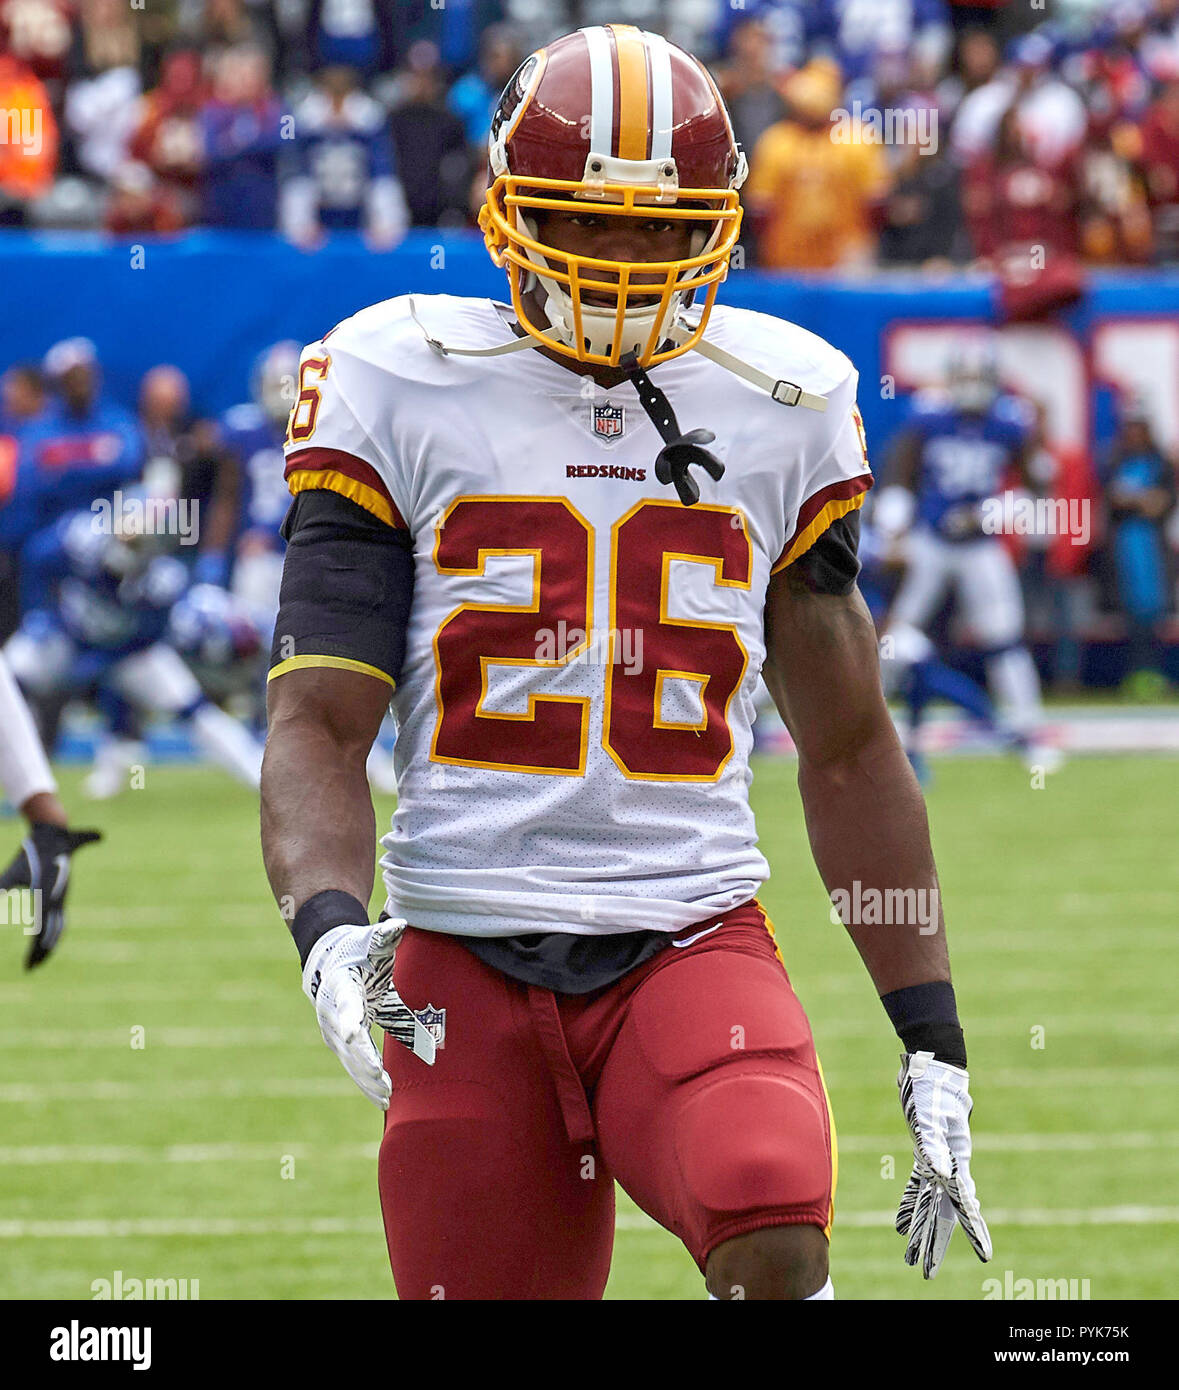 East Rutherford, New Jersey, USA. 28th Oct, 2018. Washington Redskins  running back Adrian Peterson (26) during warm up prior to NFL game between  the Washington Redskins and the New York Giants at